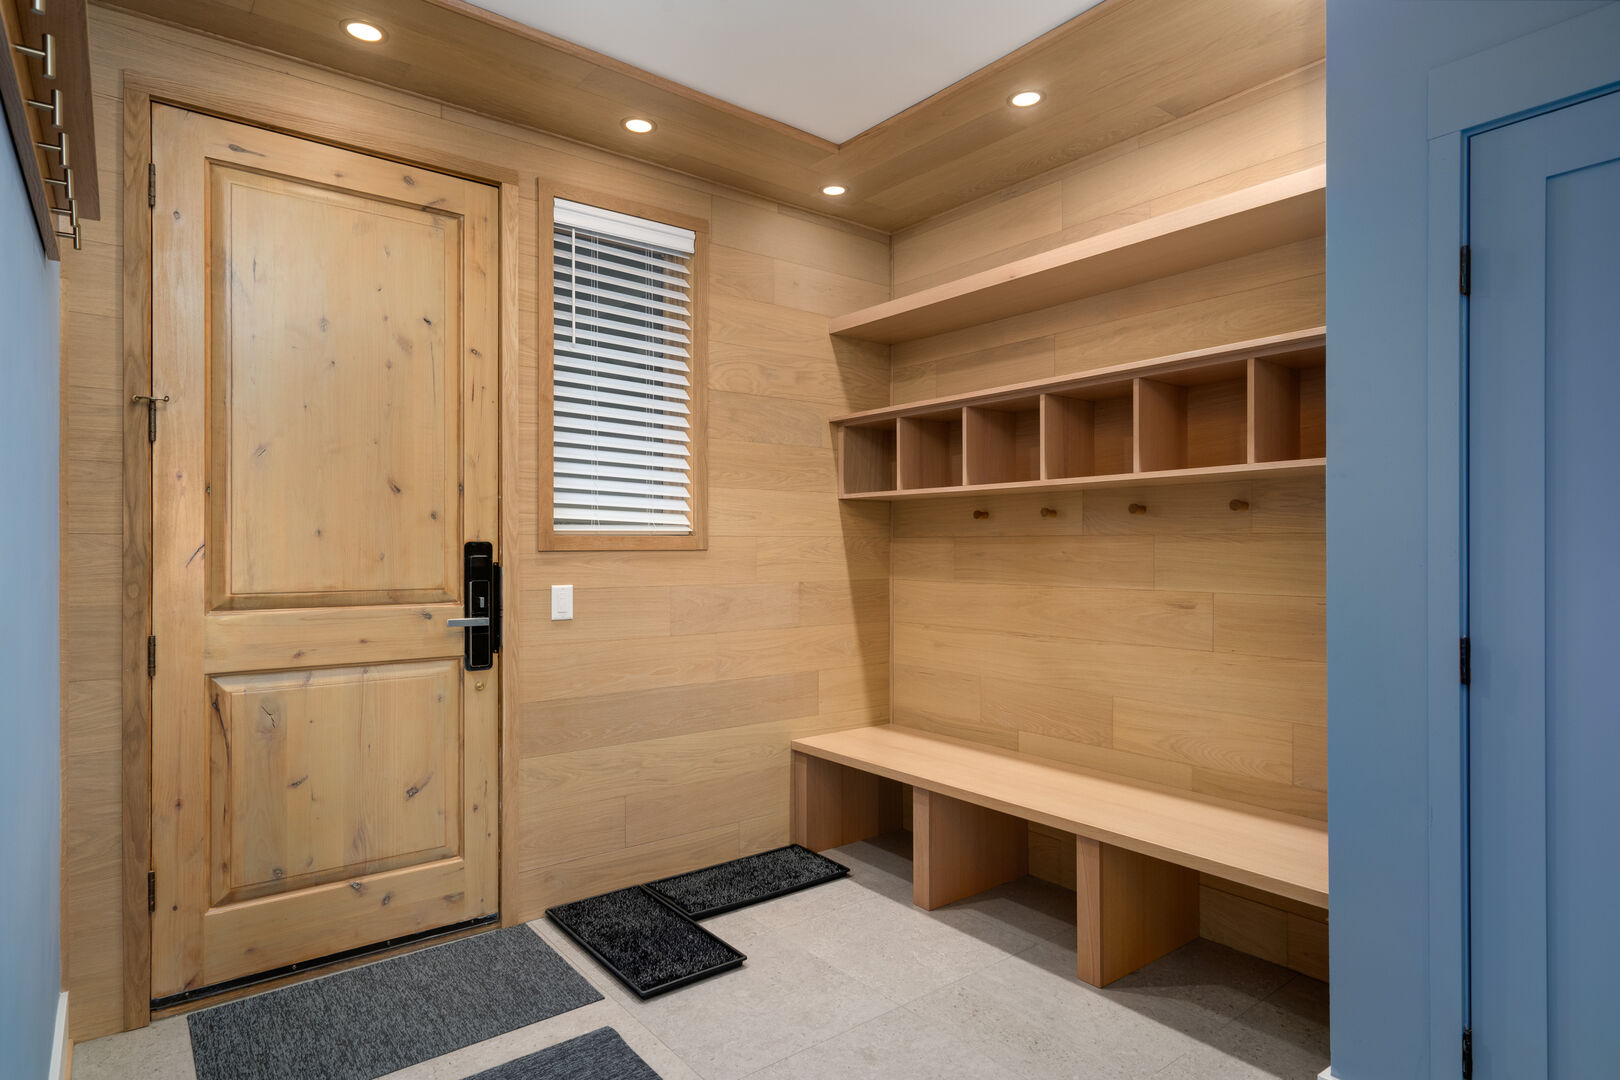 Stay organized with the entry mudroom, cubbies, coat racks and closet.